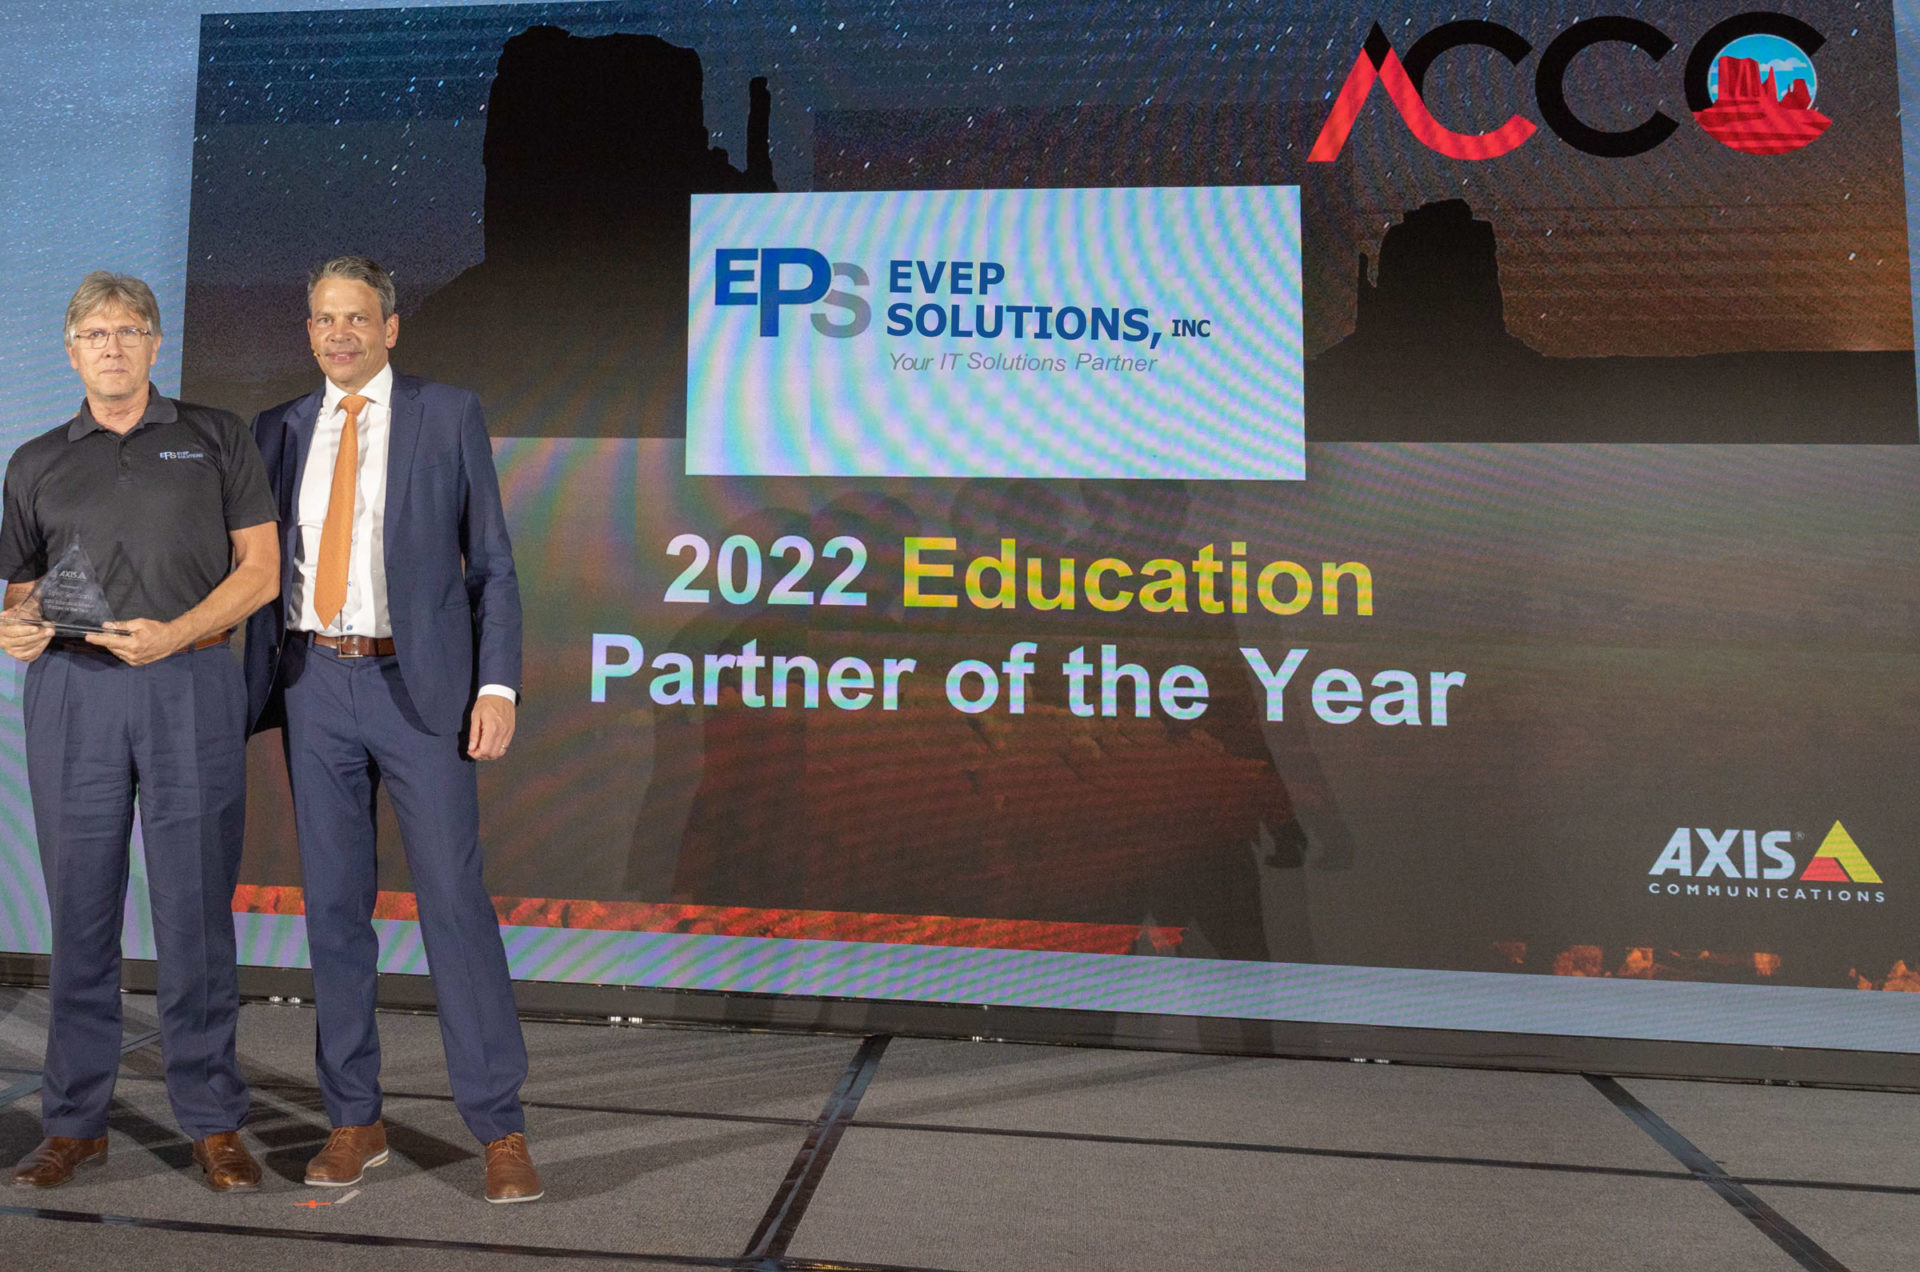 EYEP Solutions Inc. - Education Partner of the Year for Axis